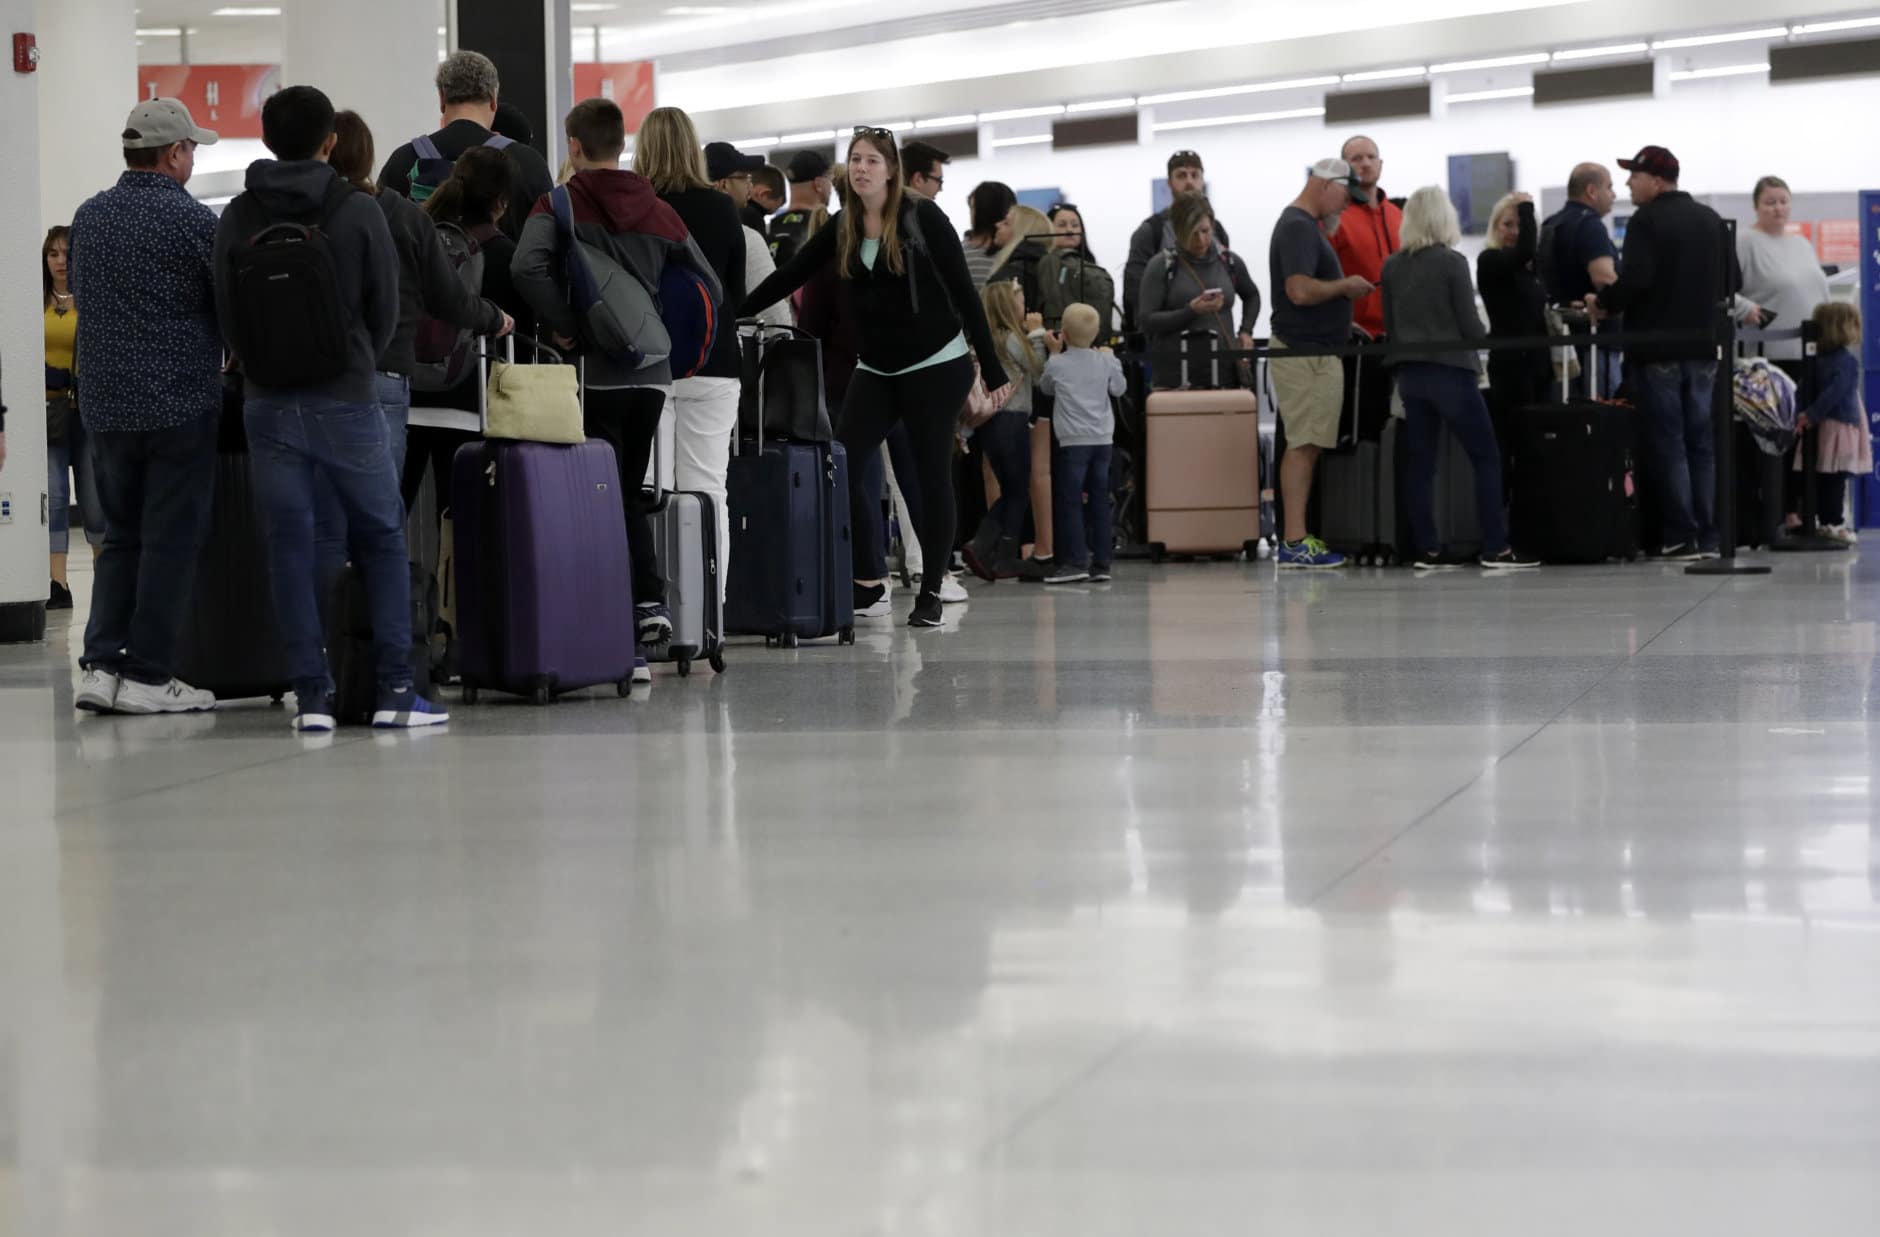 Passengers wait in line at Sun Country Airlines in Terminal G at Miami International Airport, Friday, Jan. 11, 2019, in Miami. The airport is closing Terminal G this weekend as the federal government shutdown stretches toward a fourth week because security screeners have been calling in sick at twice the airport's normal rate. (AP Photo/Lynne Sladky)